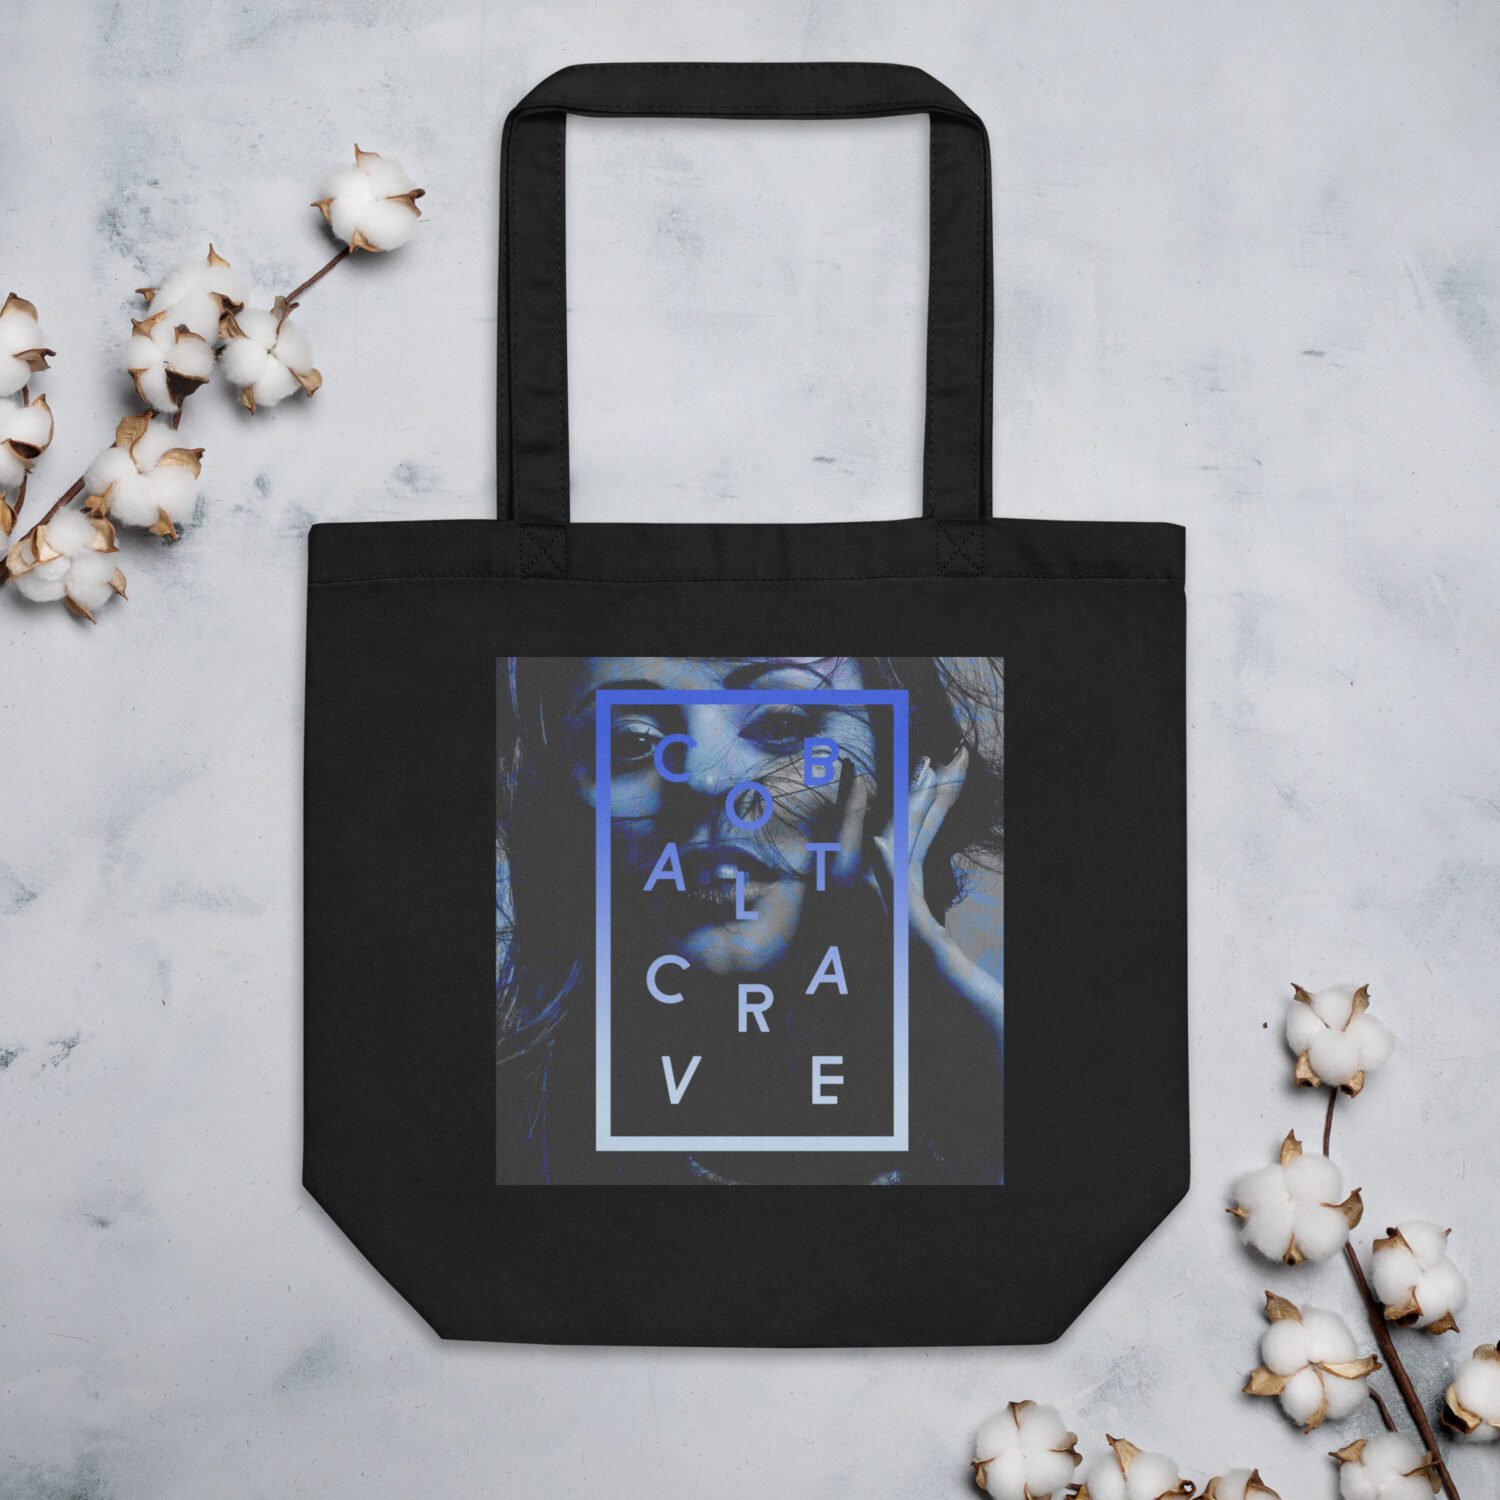 Organic cotton tote bag with a beautiful print in black and electric blue. In this tote there’s more than enough room for groceries, books, and anything in between.